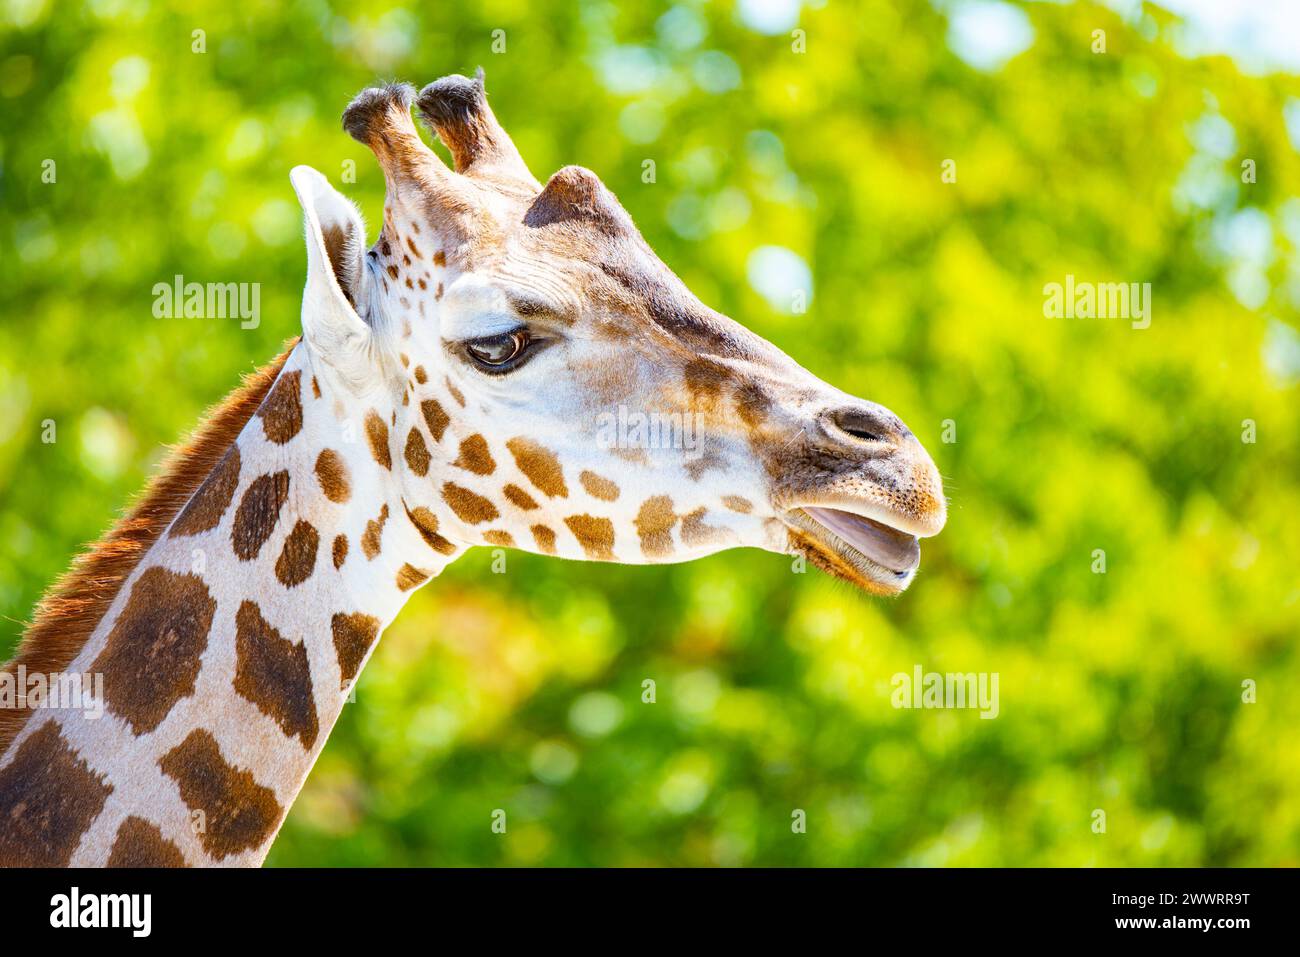 Giraffe head close-up. Deatiled view of african wildlife. Stock Photo